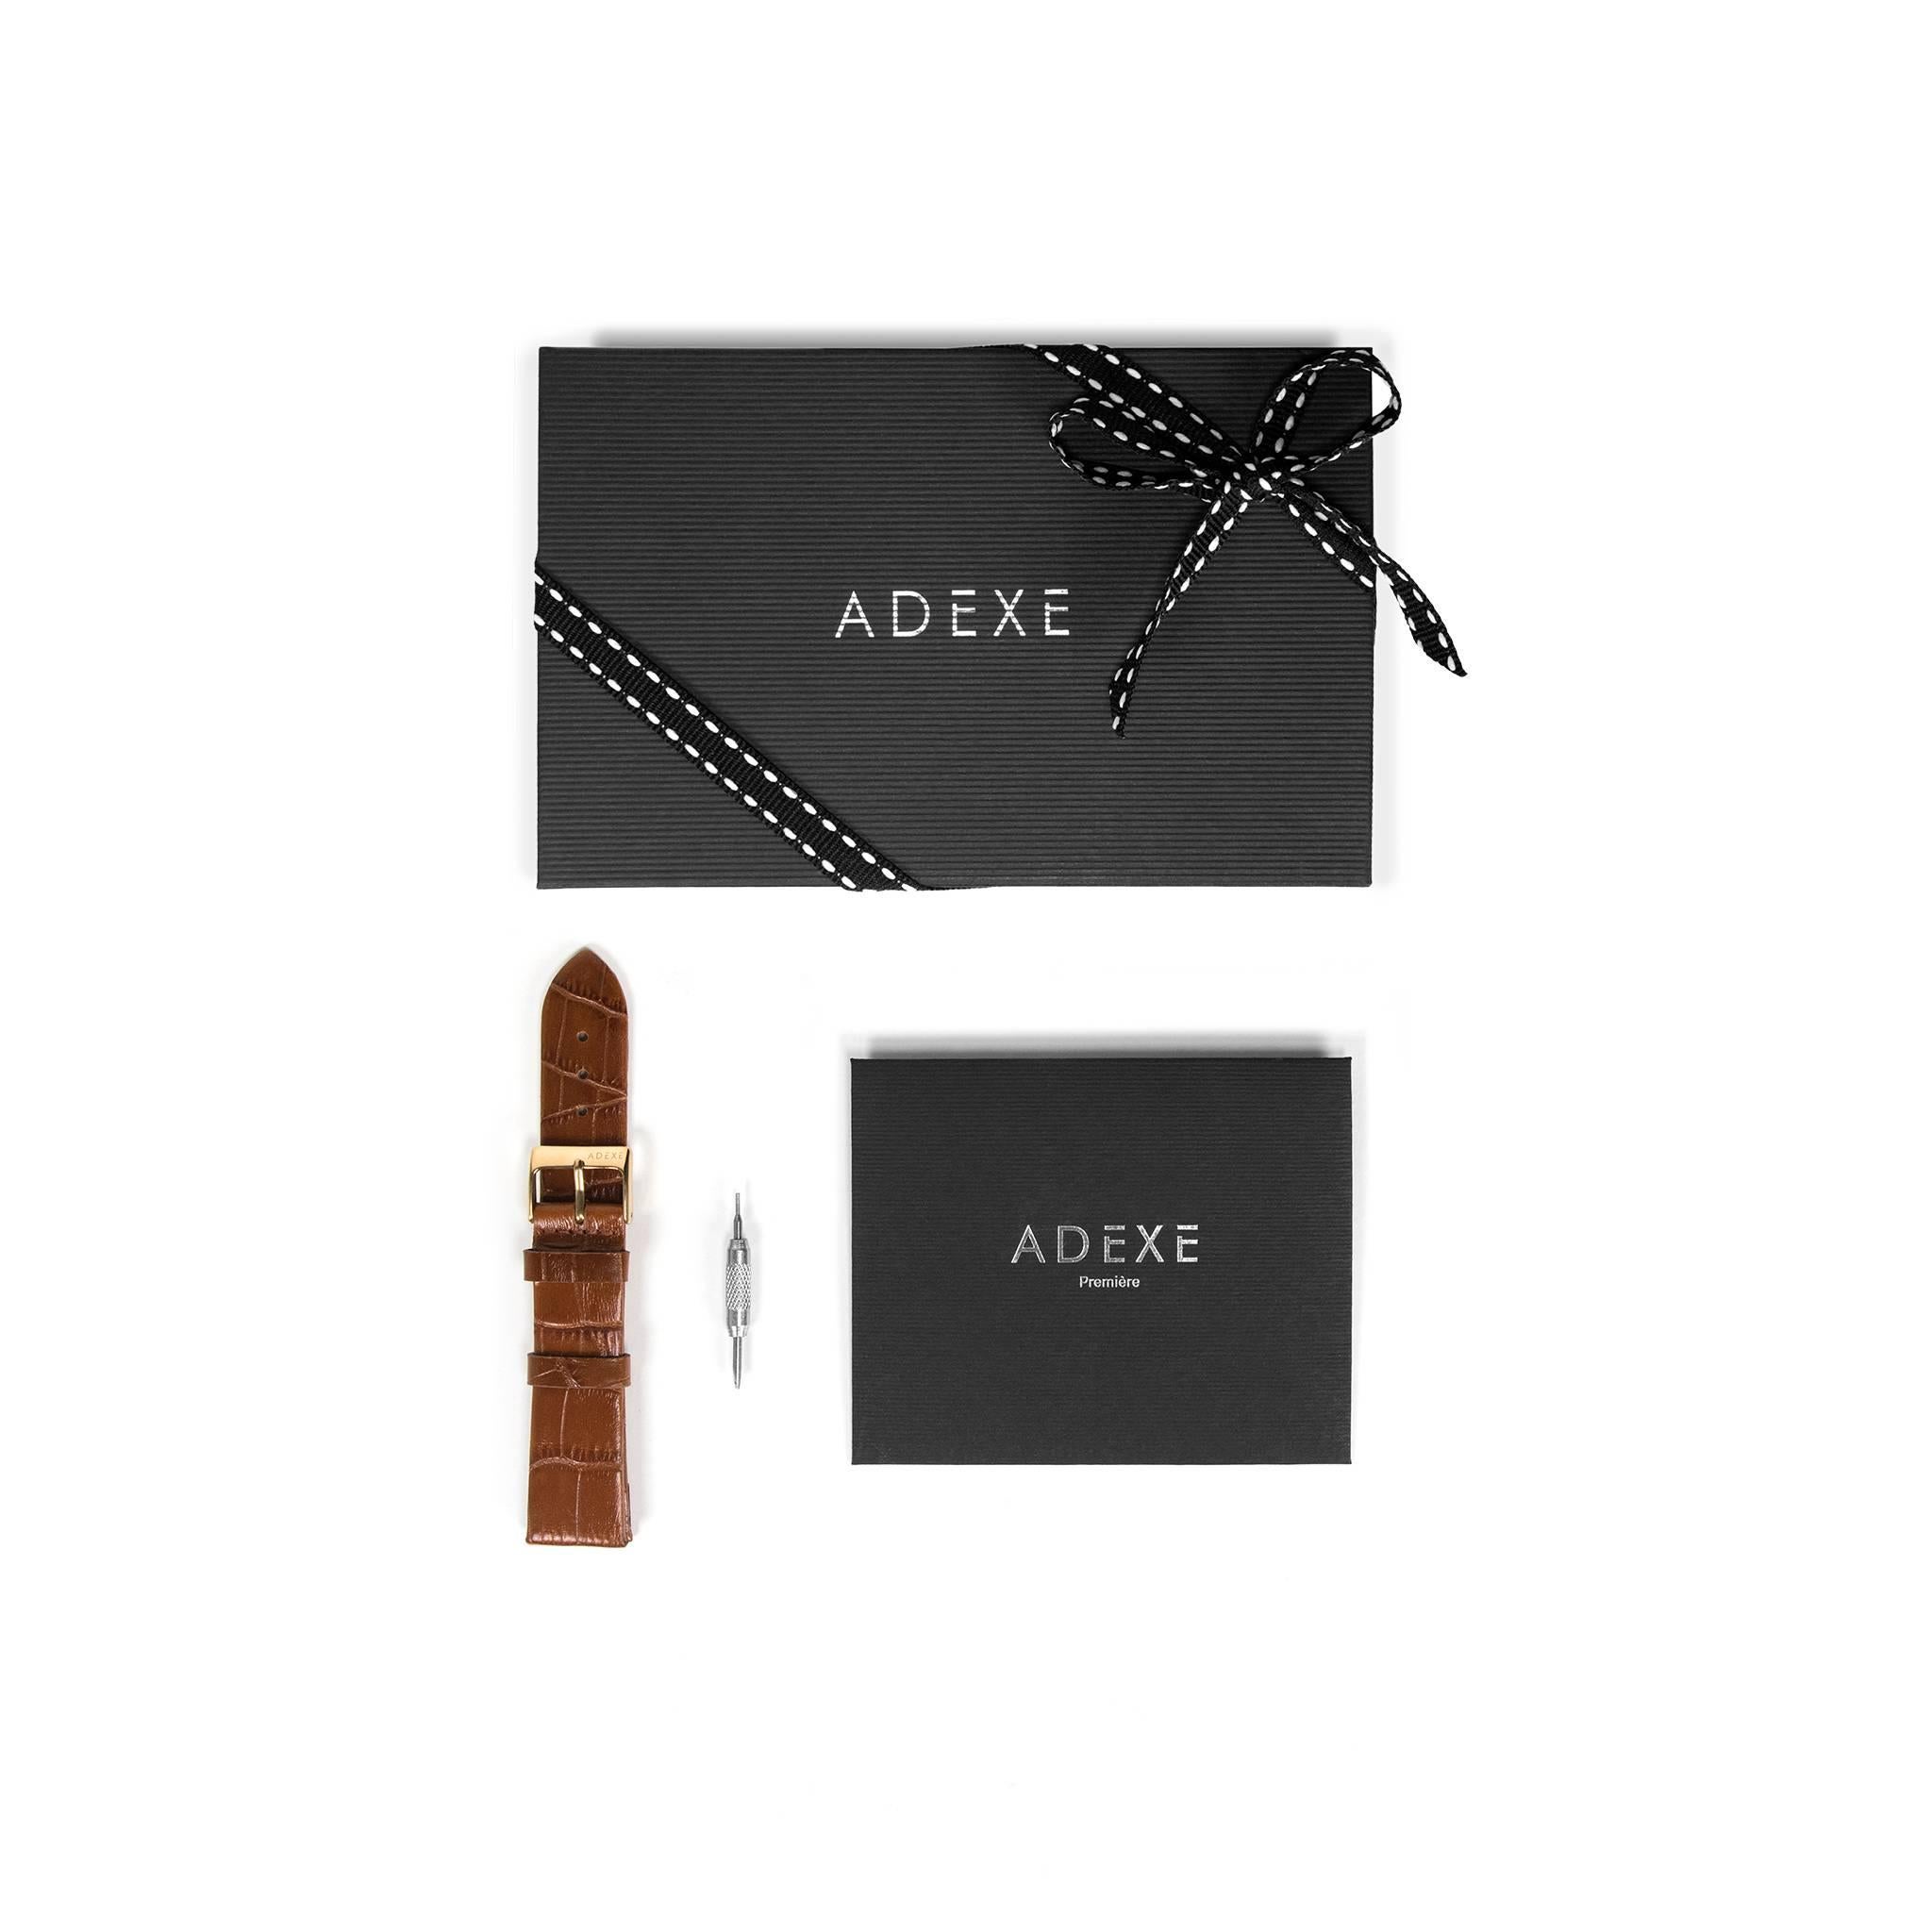 Contemporary Adexe Stainless Steel Minimal Sleek Meek Petite Silver Watch Gift for Her For Sale